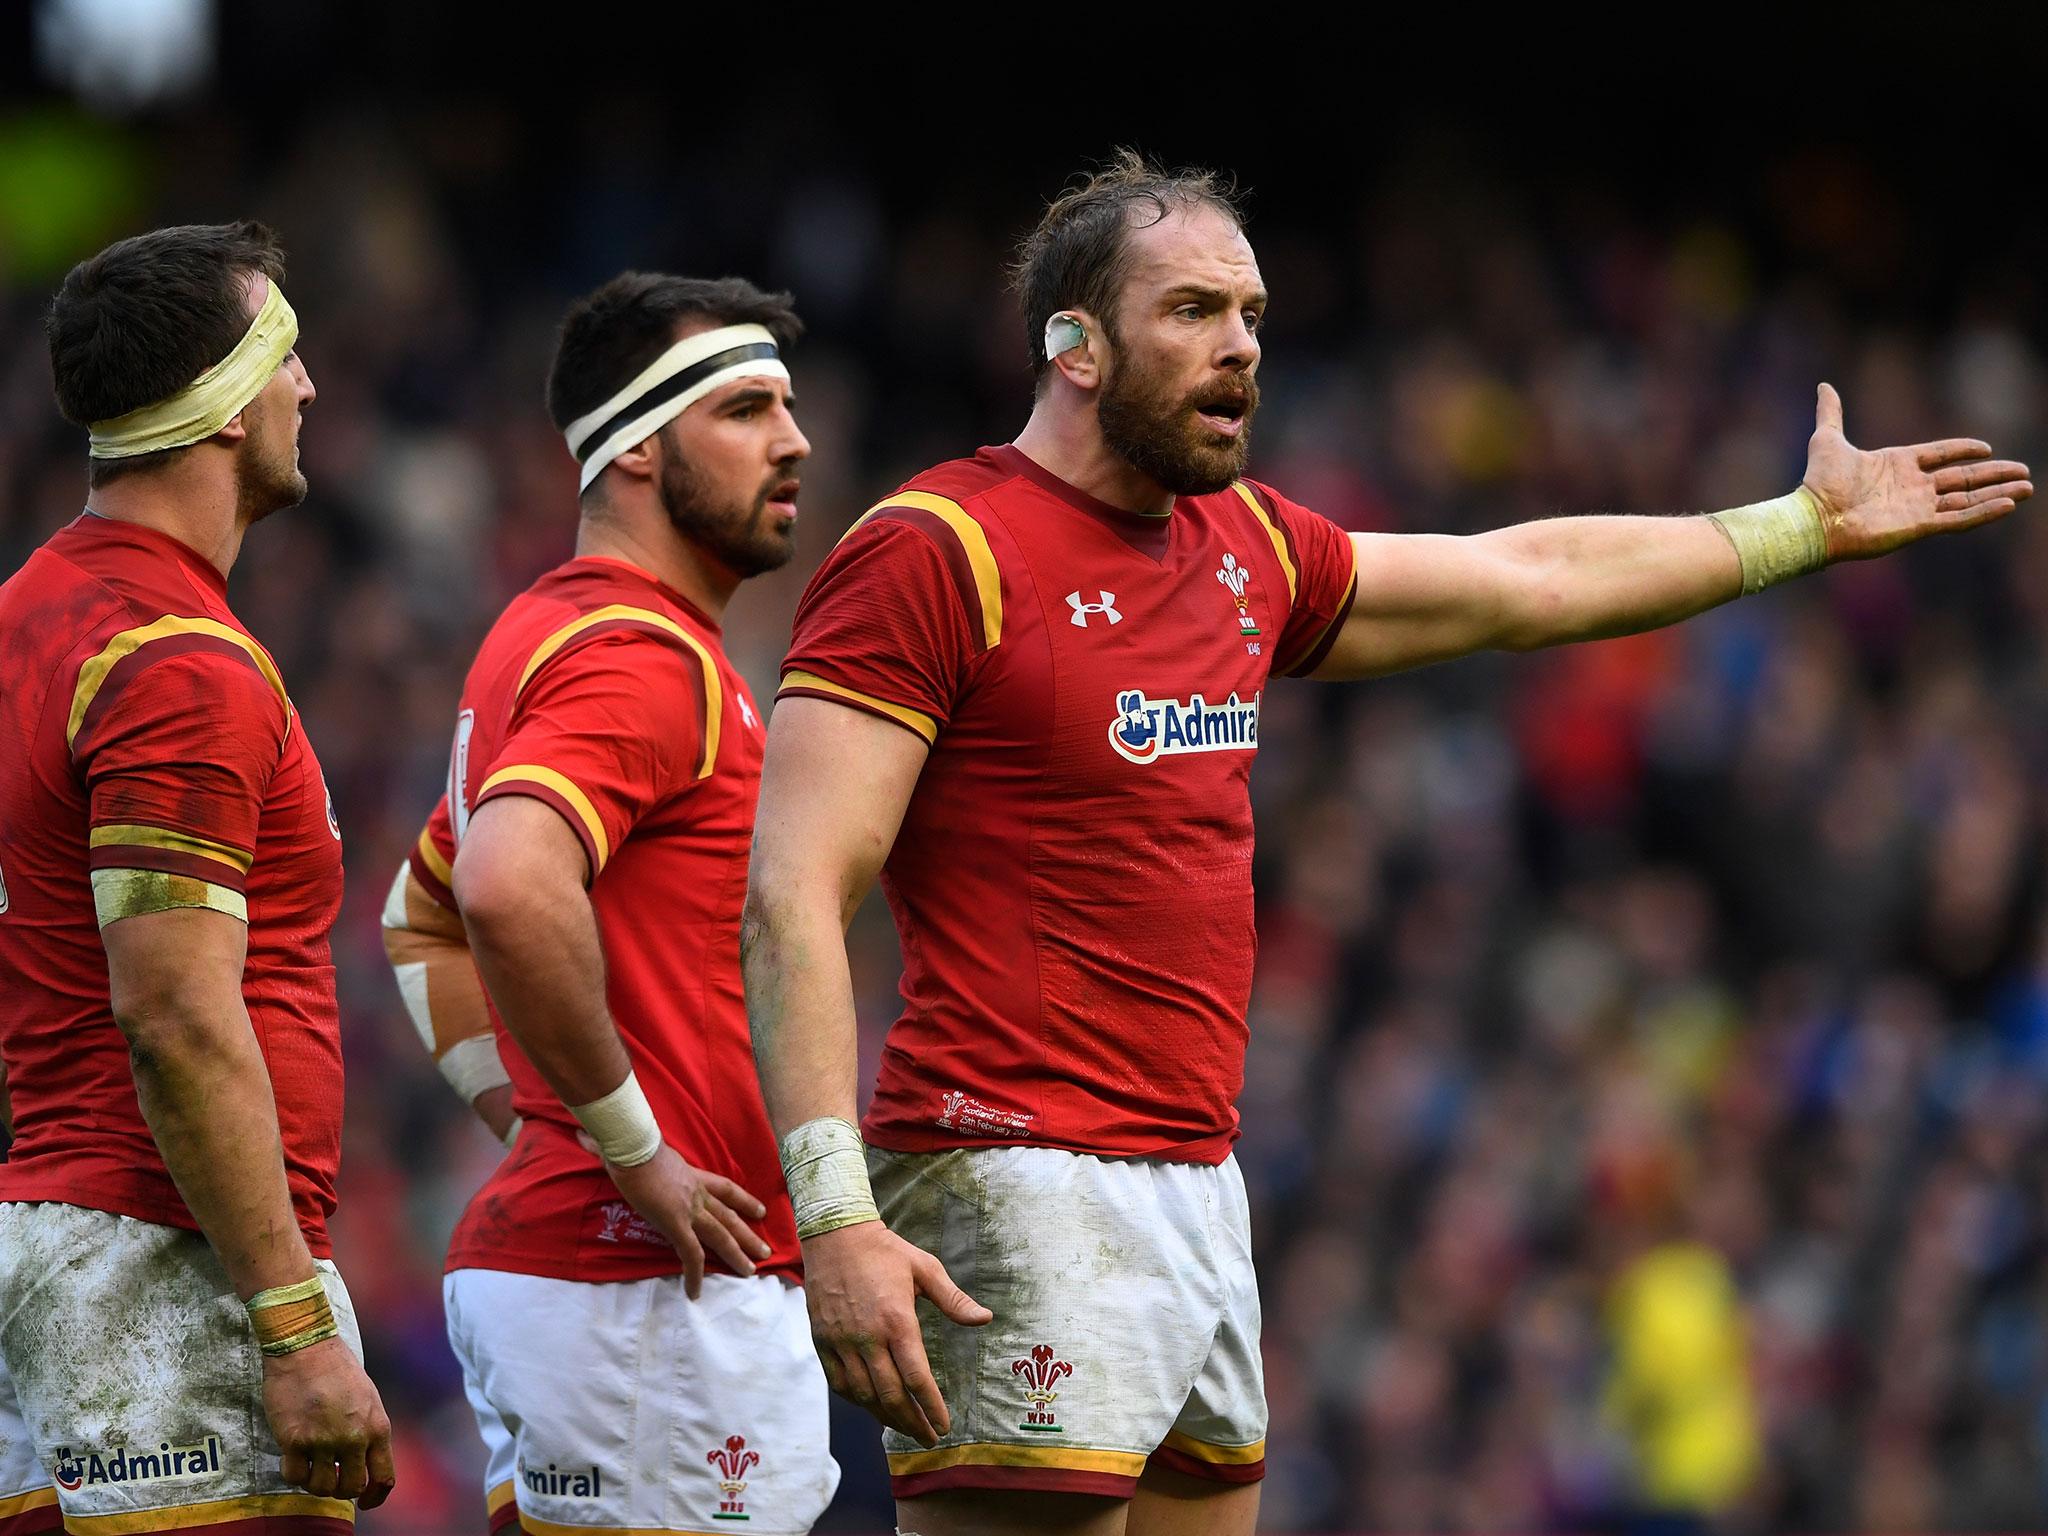 Wales suffered a 29-13 defeat by Scotland to drop to seventh in the world rankings